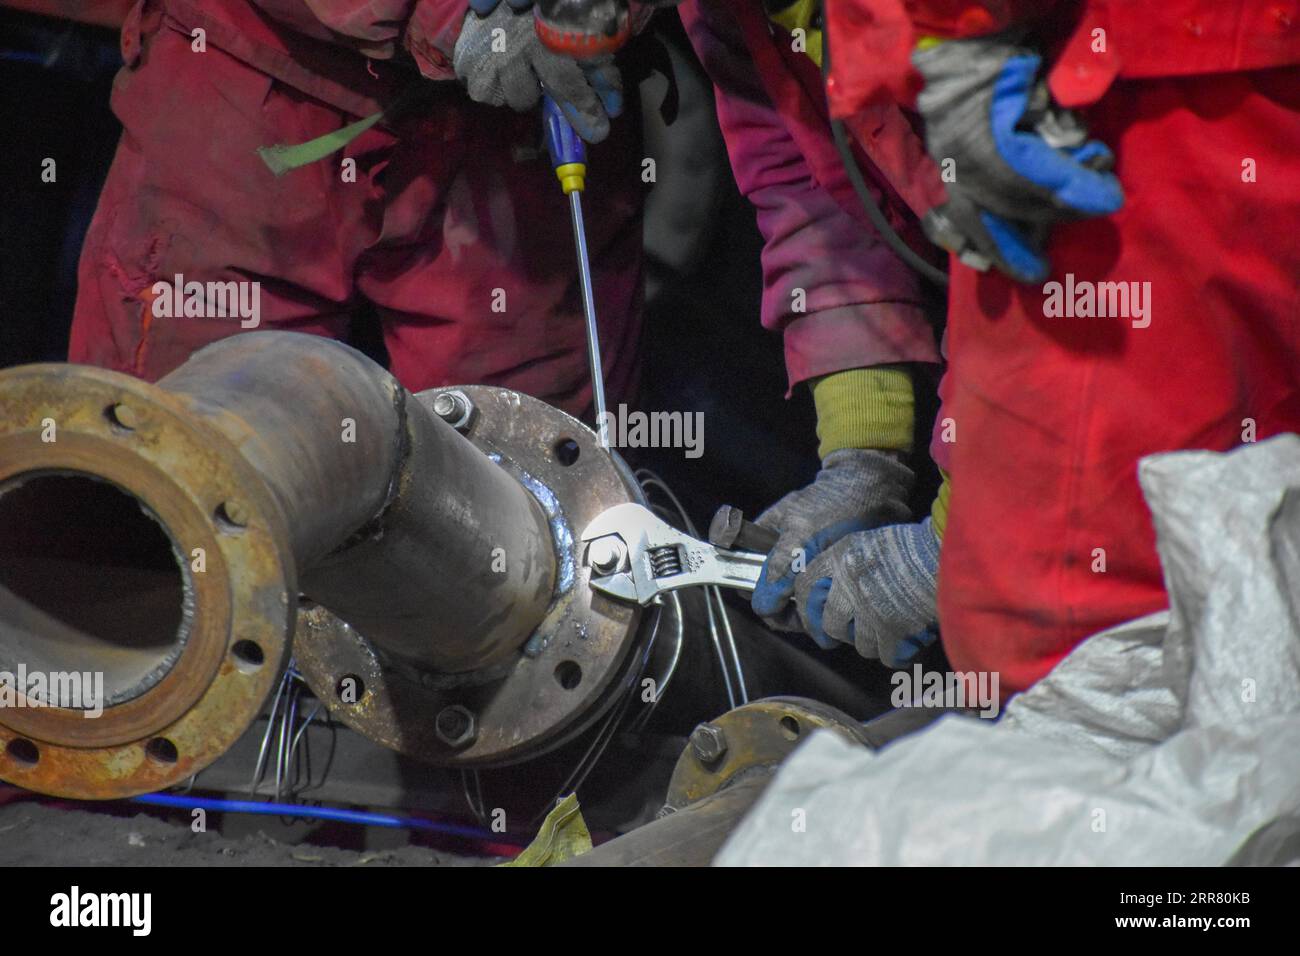 210411 -- URUMQI, April 11, 2021 -- Rescuers work at a flooded coal mine in Hutubi County of Hui Autonomous Prefecture of Changji, northwest China s Xinjiang Uygur Autonomous Region, April 11, 2021. Eight people have been rescued and 21 still trapped after a coal mine was flooded Saturday in Xinjiang, local authorities said Sunday. The accident occurred around 6:10 p.m. Saturday, when 29 workers were upgrading the coal mine. Rescue work is currently underway.  SPOT NEWSCHINA-XINJIANG-COAL MINE ACCIDENT-RESCUE CN GaoxHan PUBLICATIONxNOTxINxCHN Stock Photo